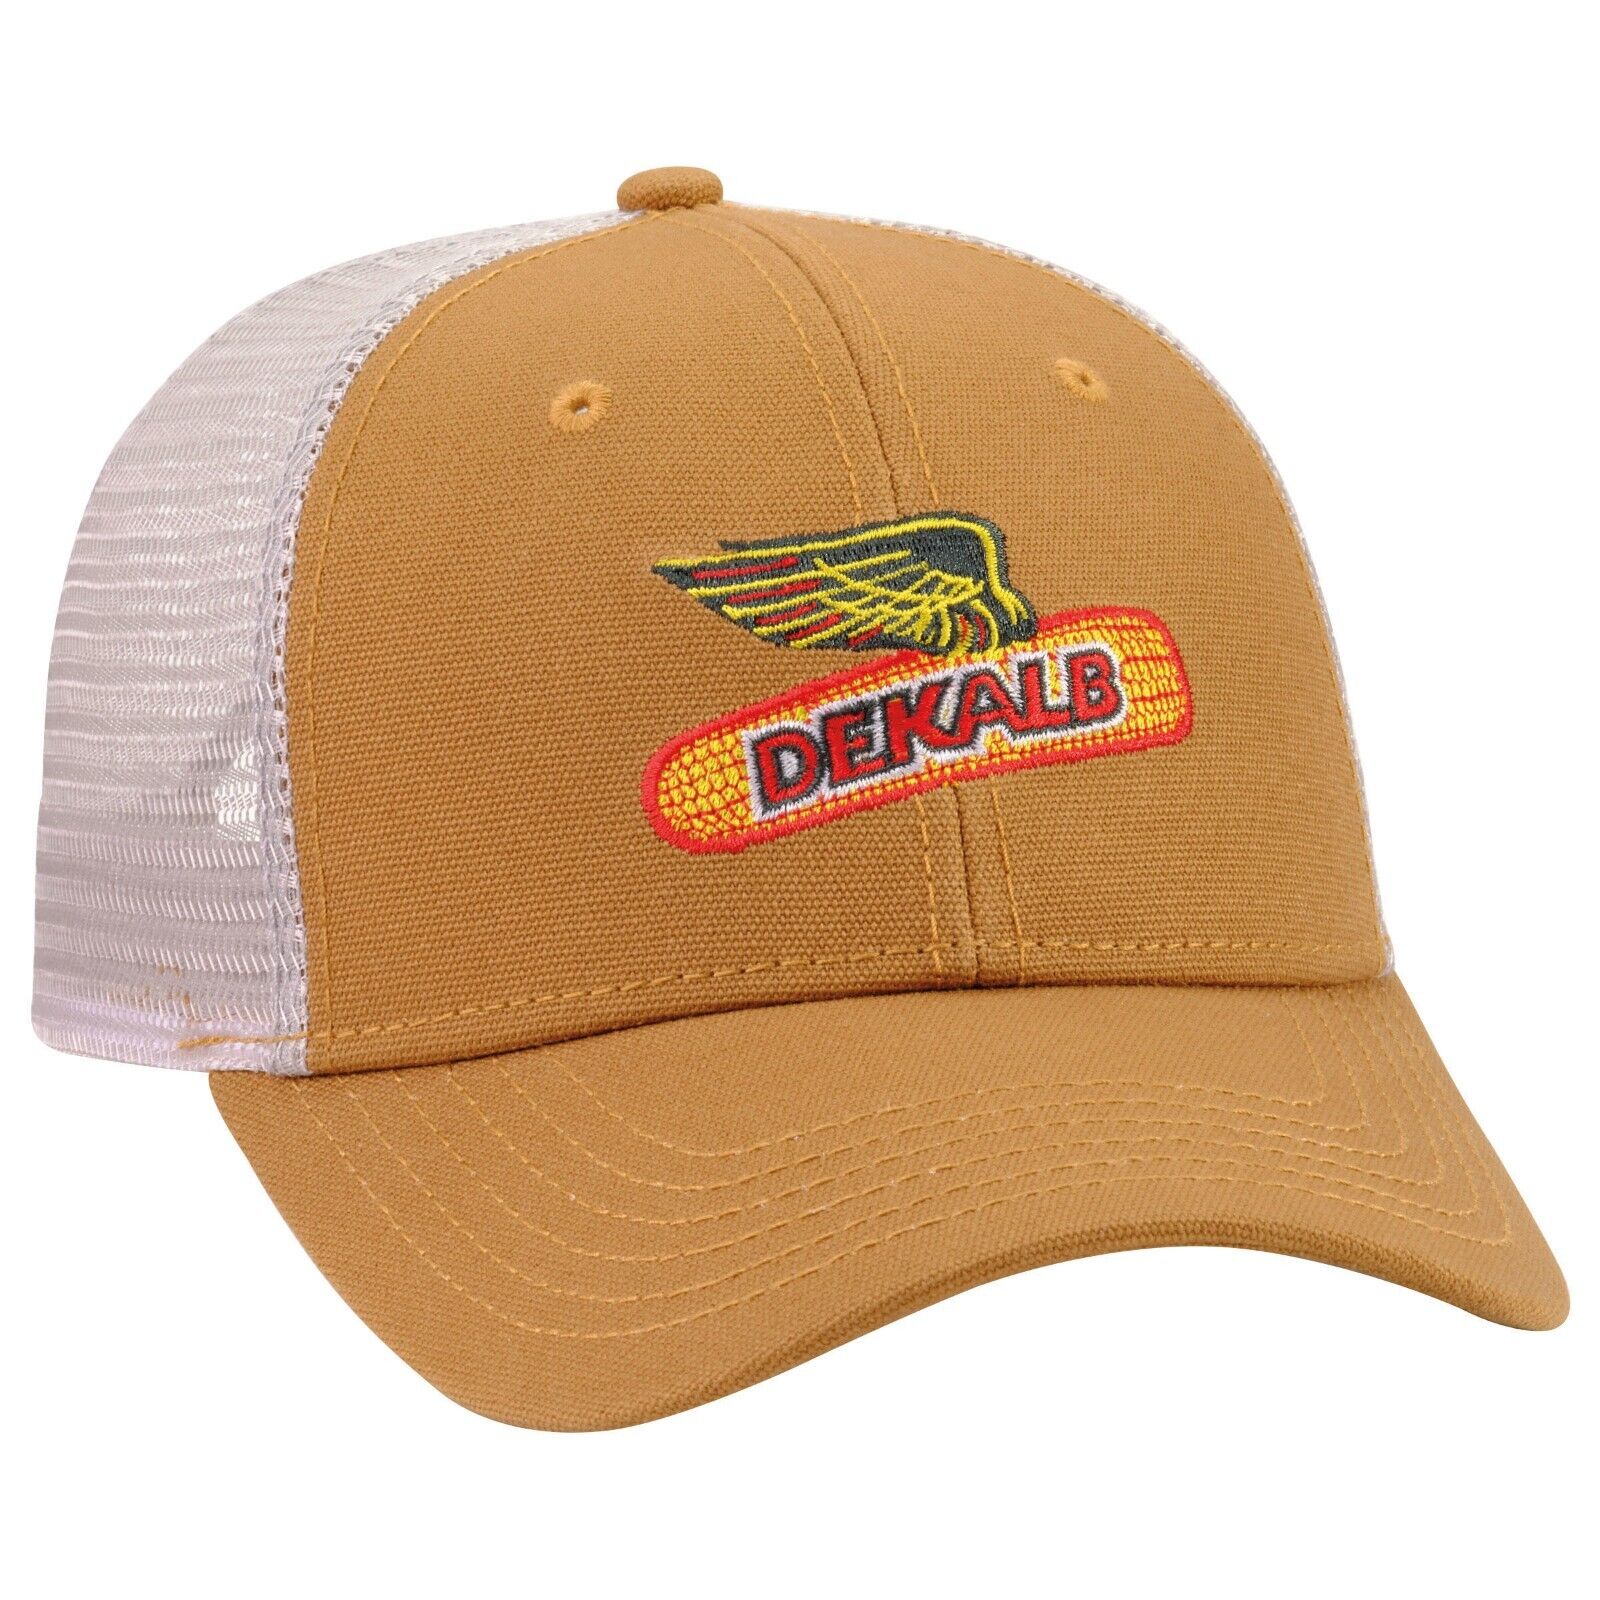 DEKALB SEED K-Products *BROWN CANVAS TWILL w/MESH BACK* CAP HAT *BRAND NEW* DS24